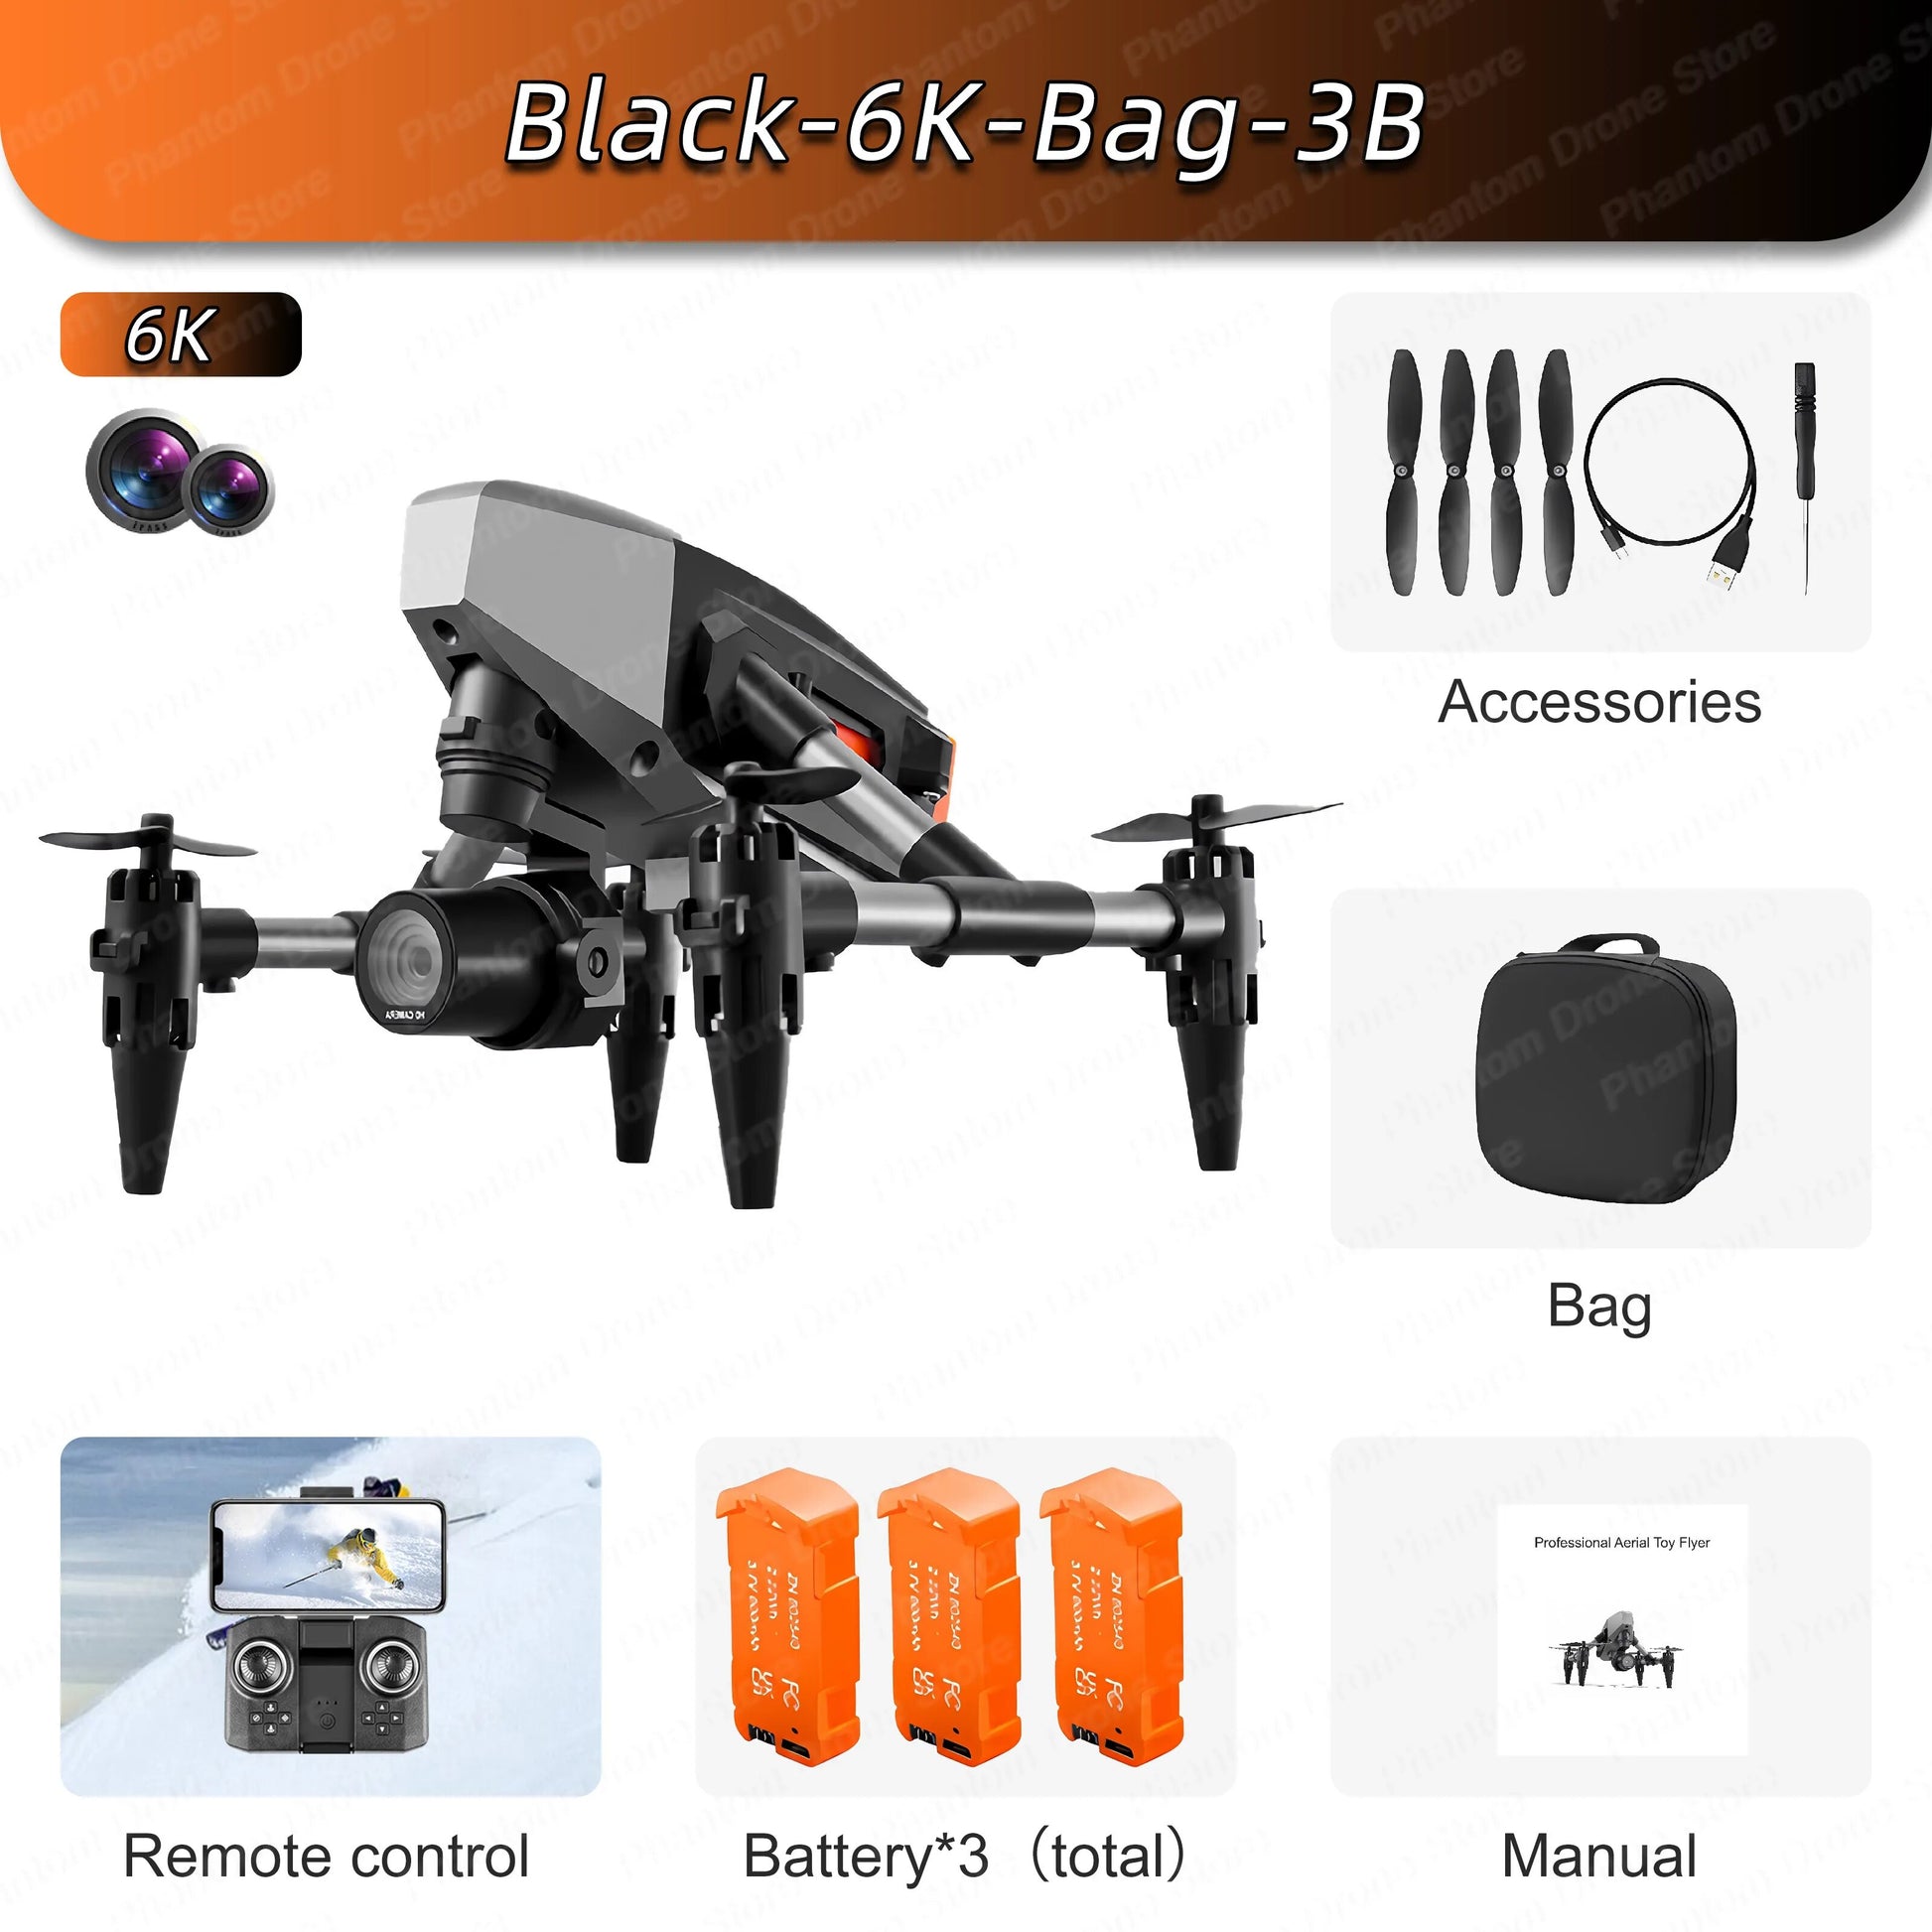 Spy Mini Drone XD1 Compact Outdoors Professional 4K/6K/8K - Black-Dual6K-Bag-3B Available at 2Fast2See.co